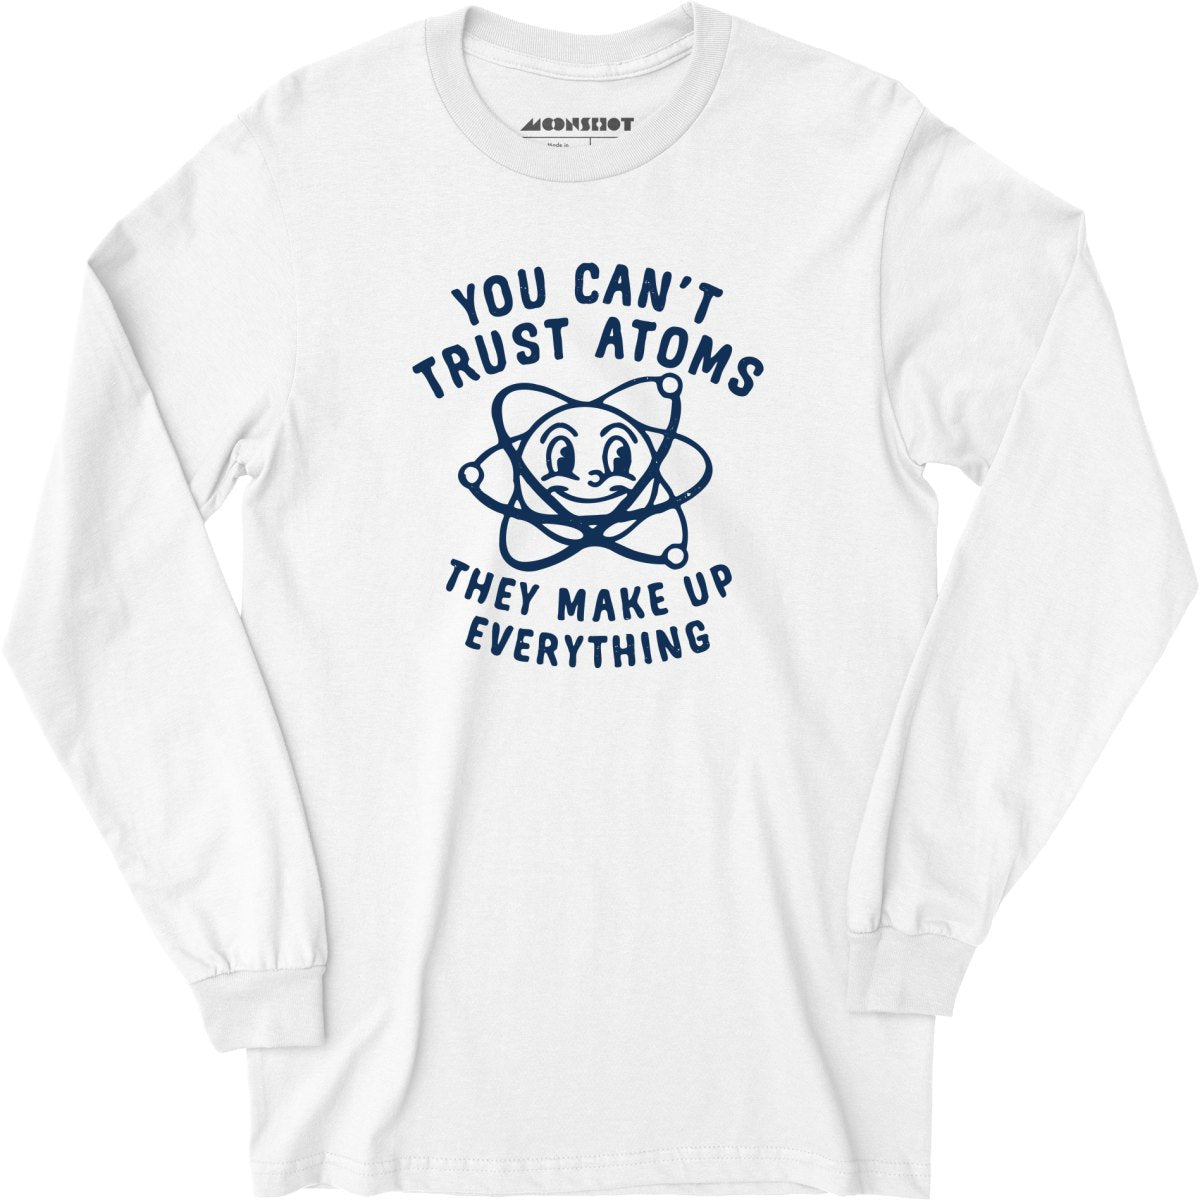 You Can't Trust Atoms - Long Sleeve T-Shirt